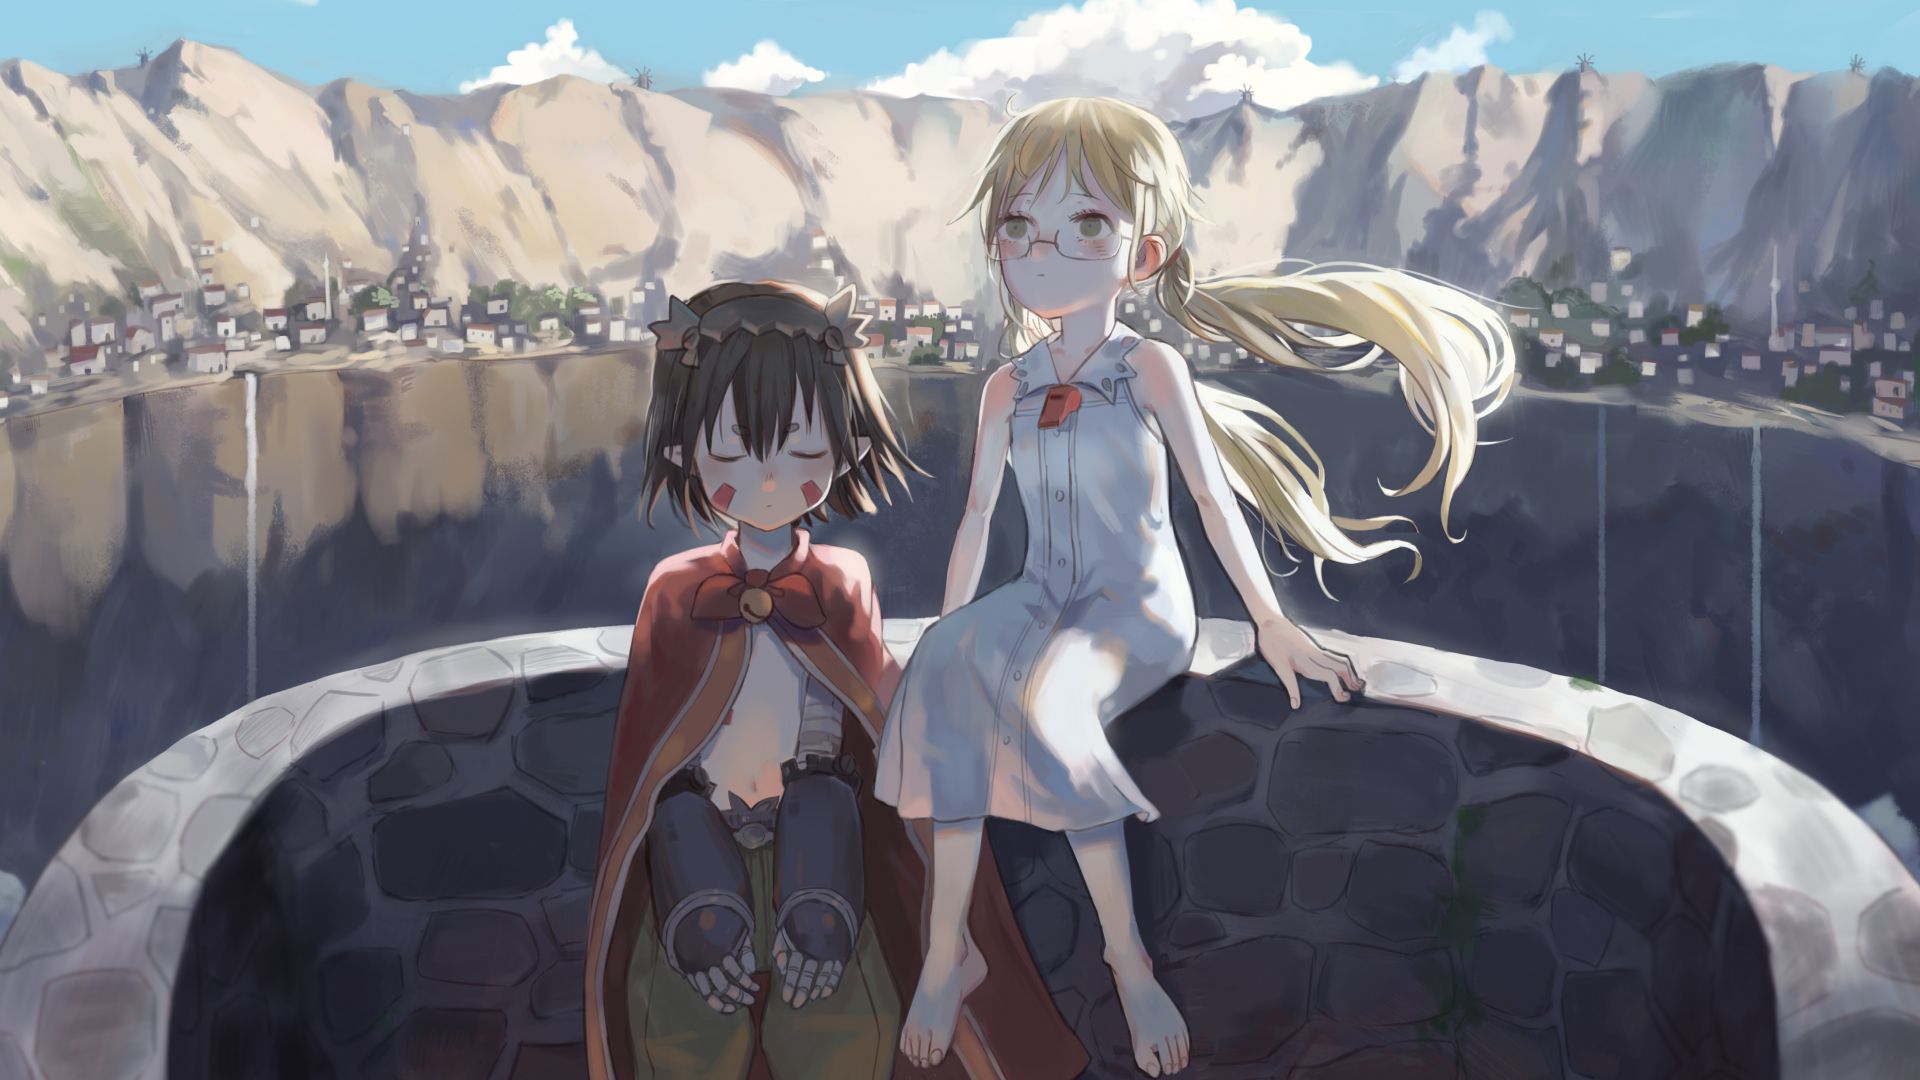 Desktop Wallpaper Riko And Regu Made In Abyss Anime Hd Image Picture Background Ef